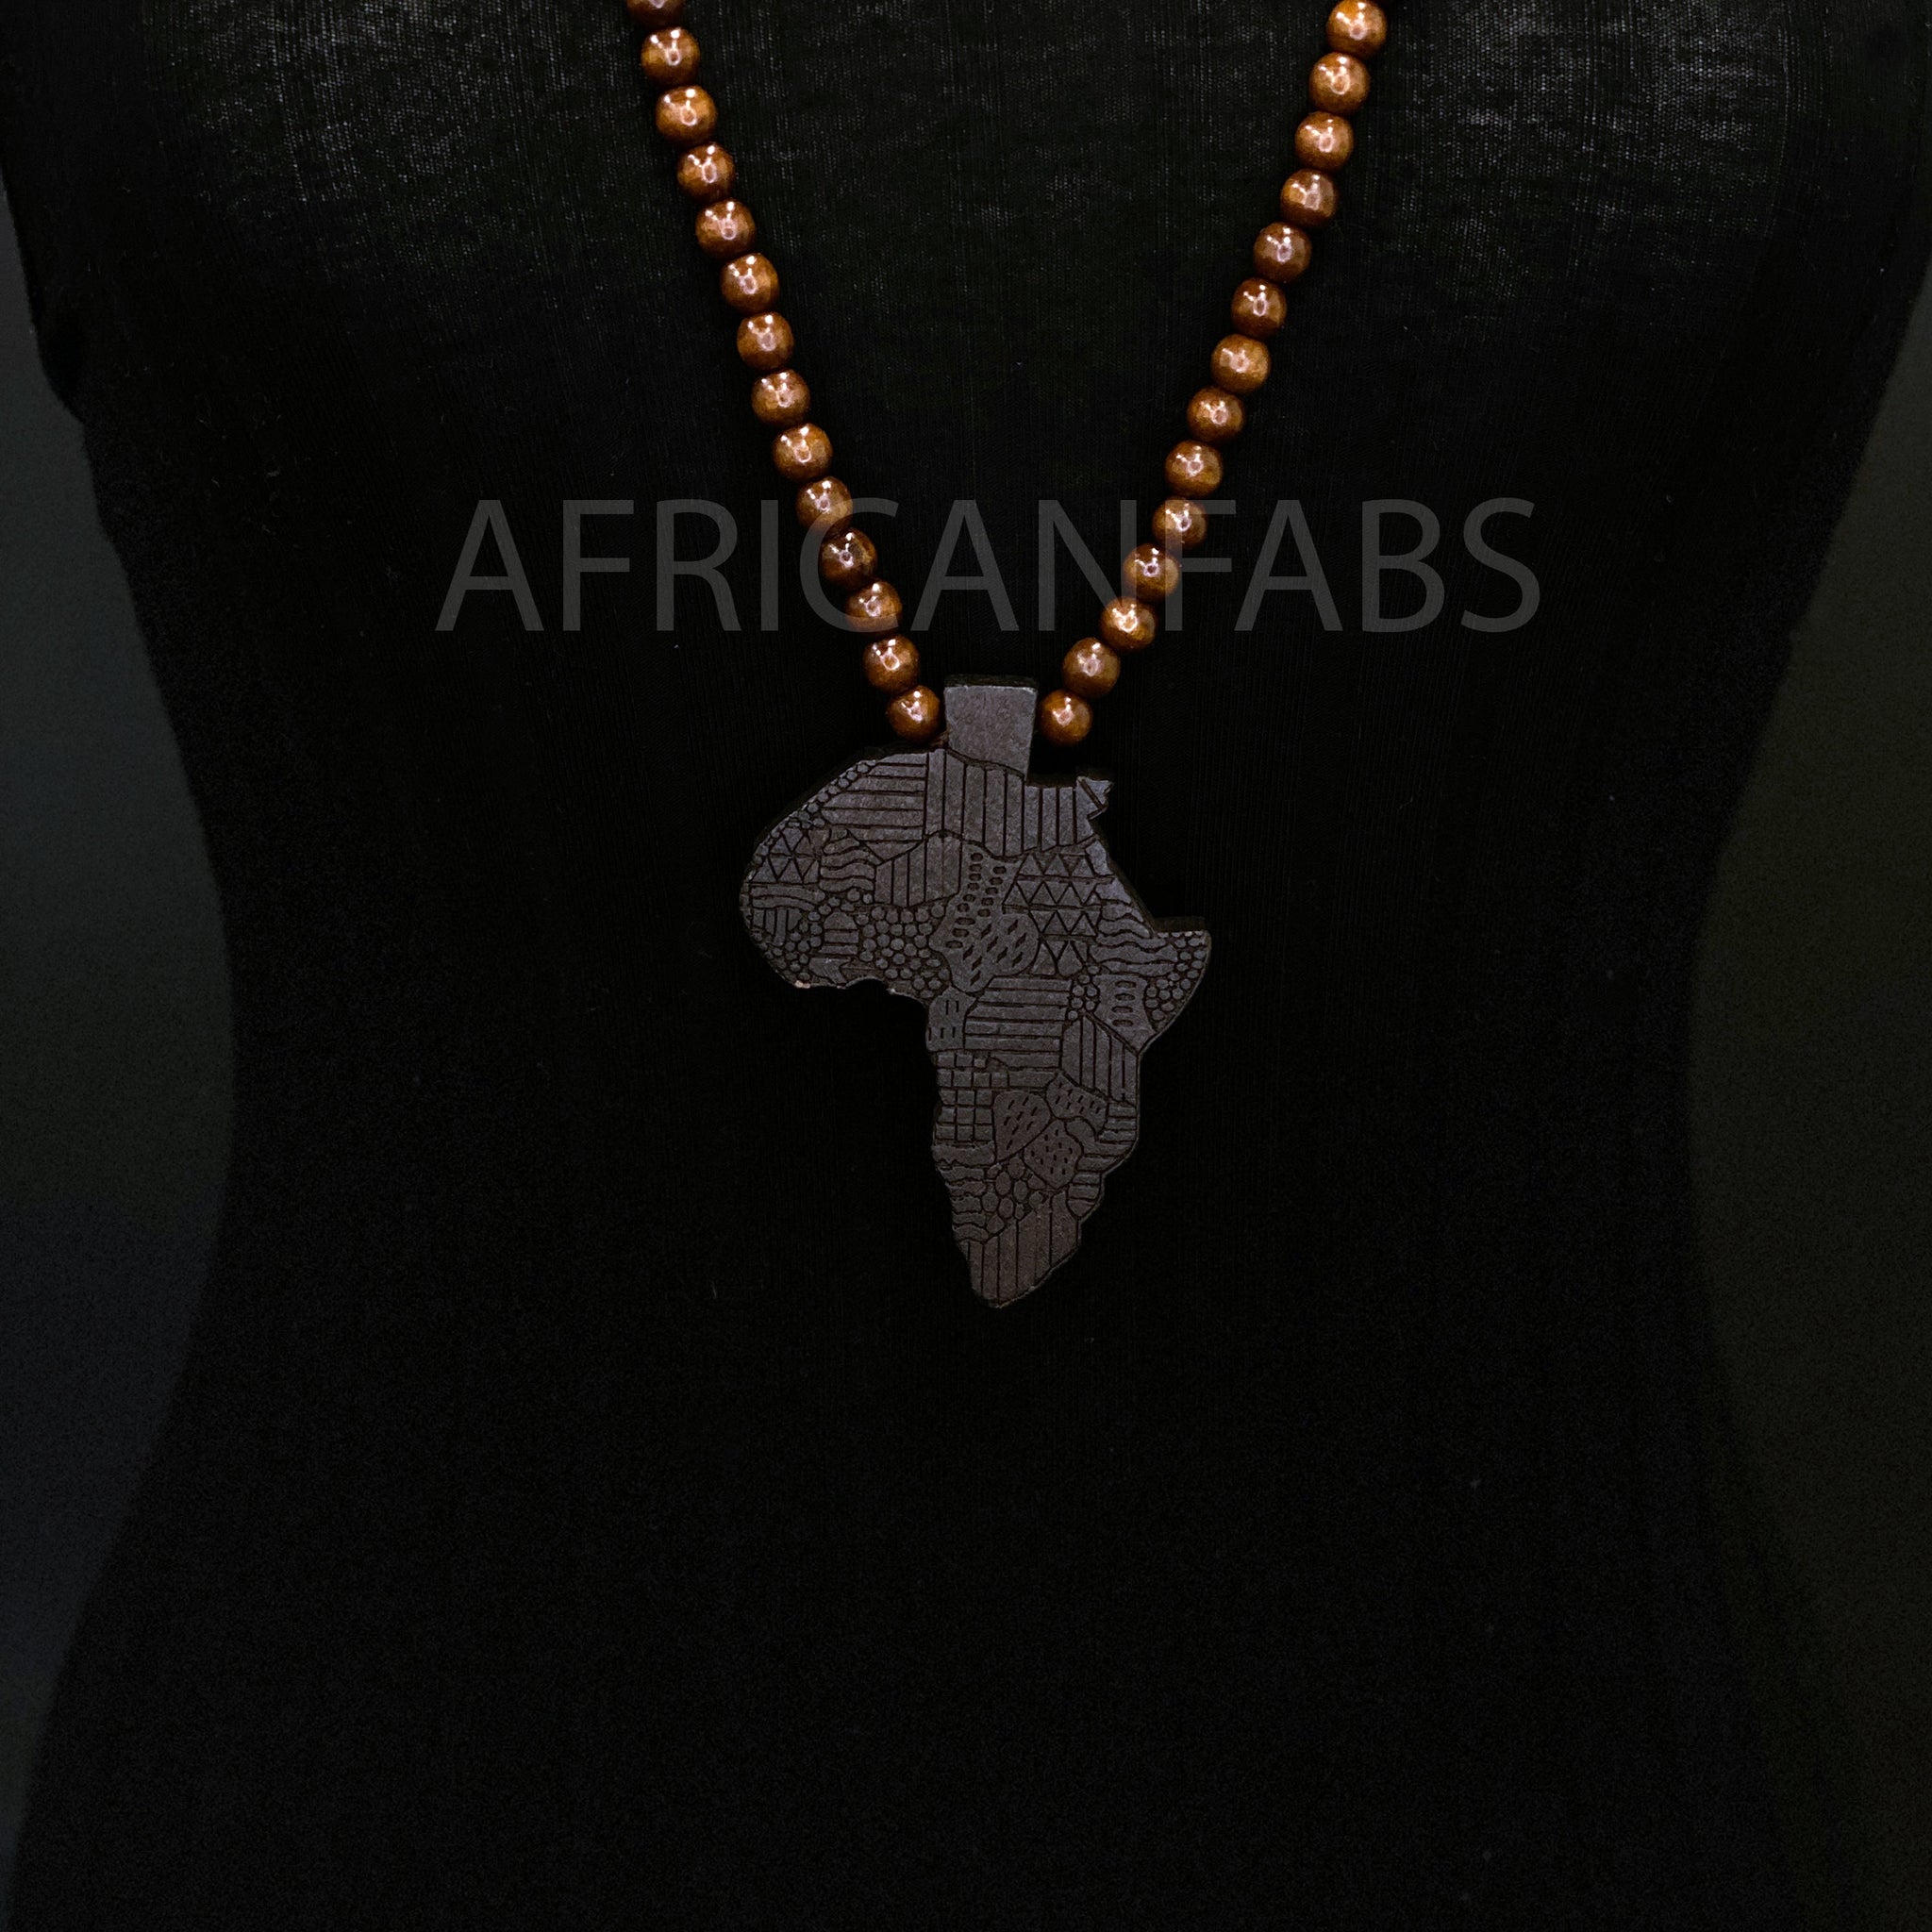 Wooden bead necklace / necklace / pendant - African continent - Black / dark brown